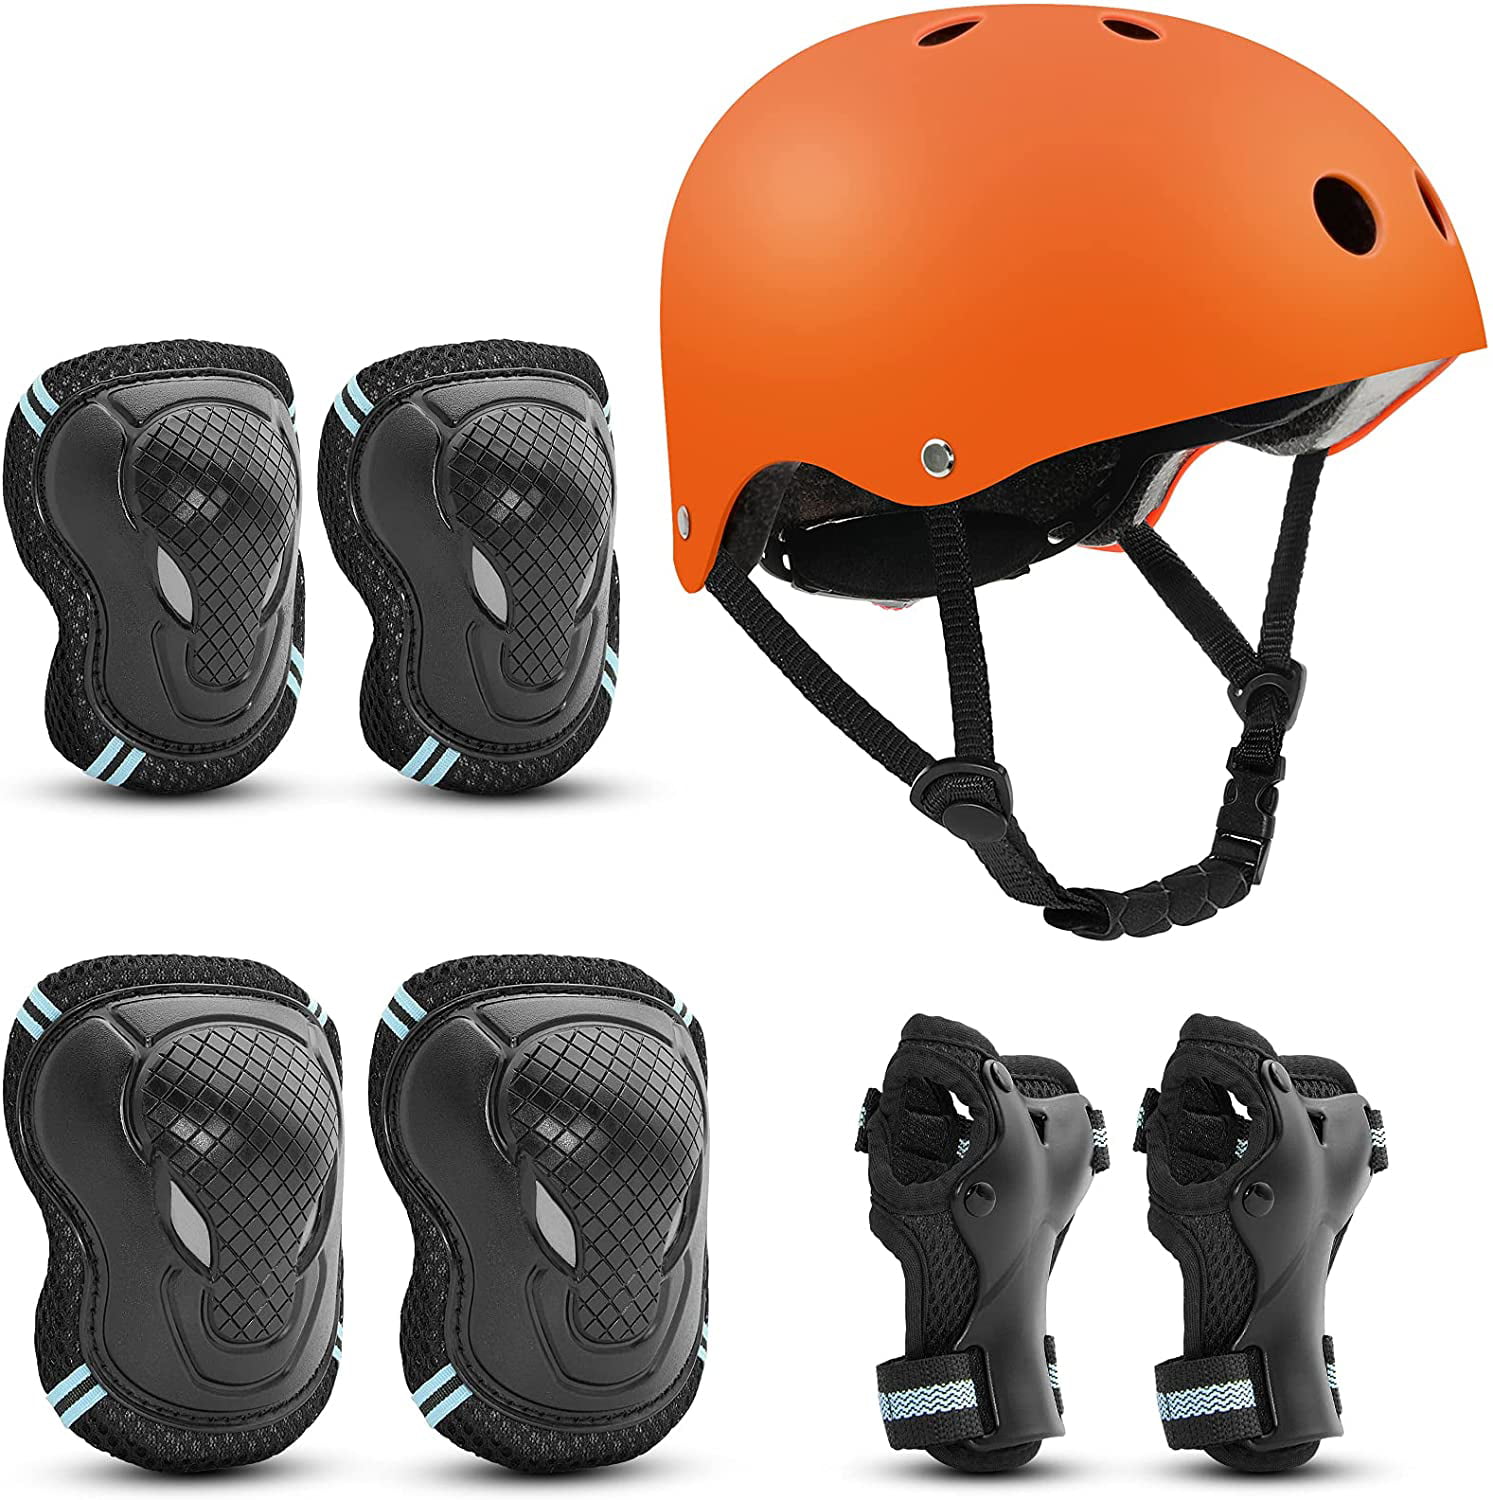 Roller Skating Helmet Wrist Elbow Knee Pads for Scooter Rollerblading Cycling Other Extreme Sports Kids Skateboarding Protective Gear Set 